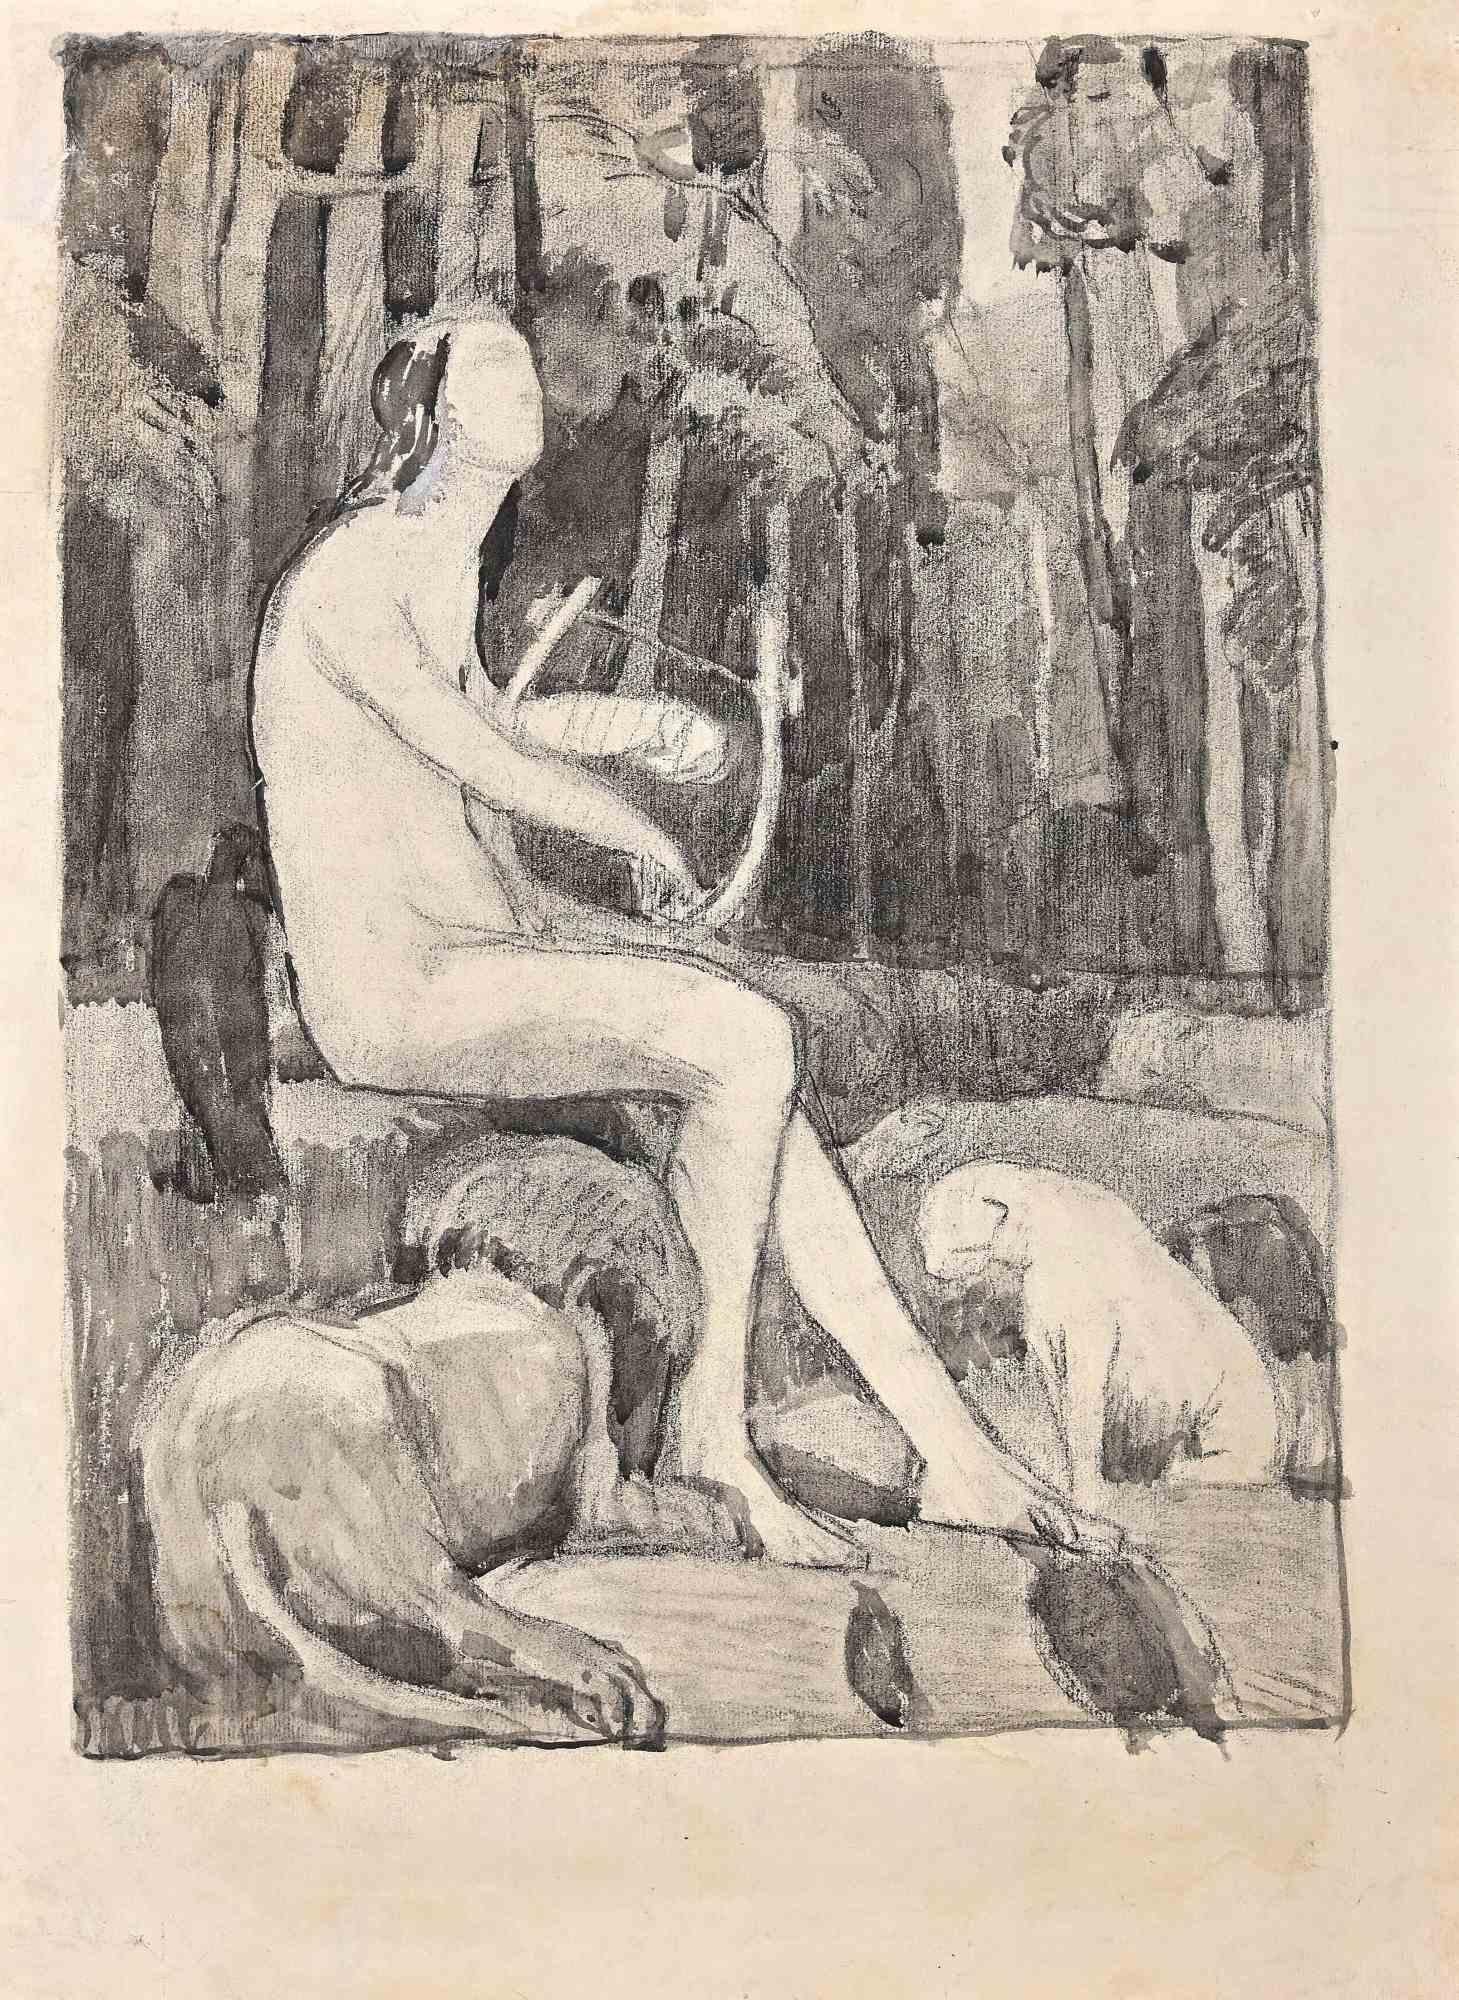 Orpheus is an artwork realized by Gustave Bourgogne in the 1940s. 

Pencil and watercolor, ink on paper. 

Good conditions.

Gustave Bourgogne (1888-1968), a french painter born in 1888 in Veigné in Indre et Loire and died in Paris in 1968. He